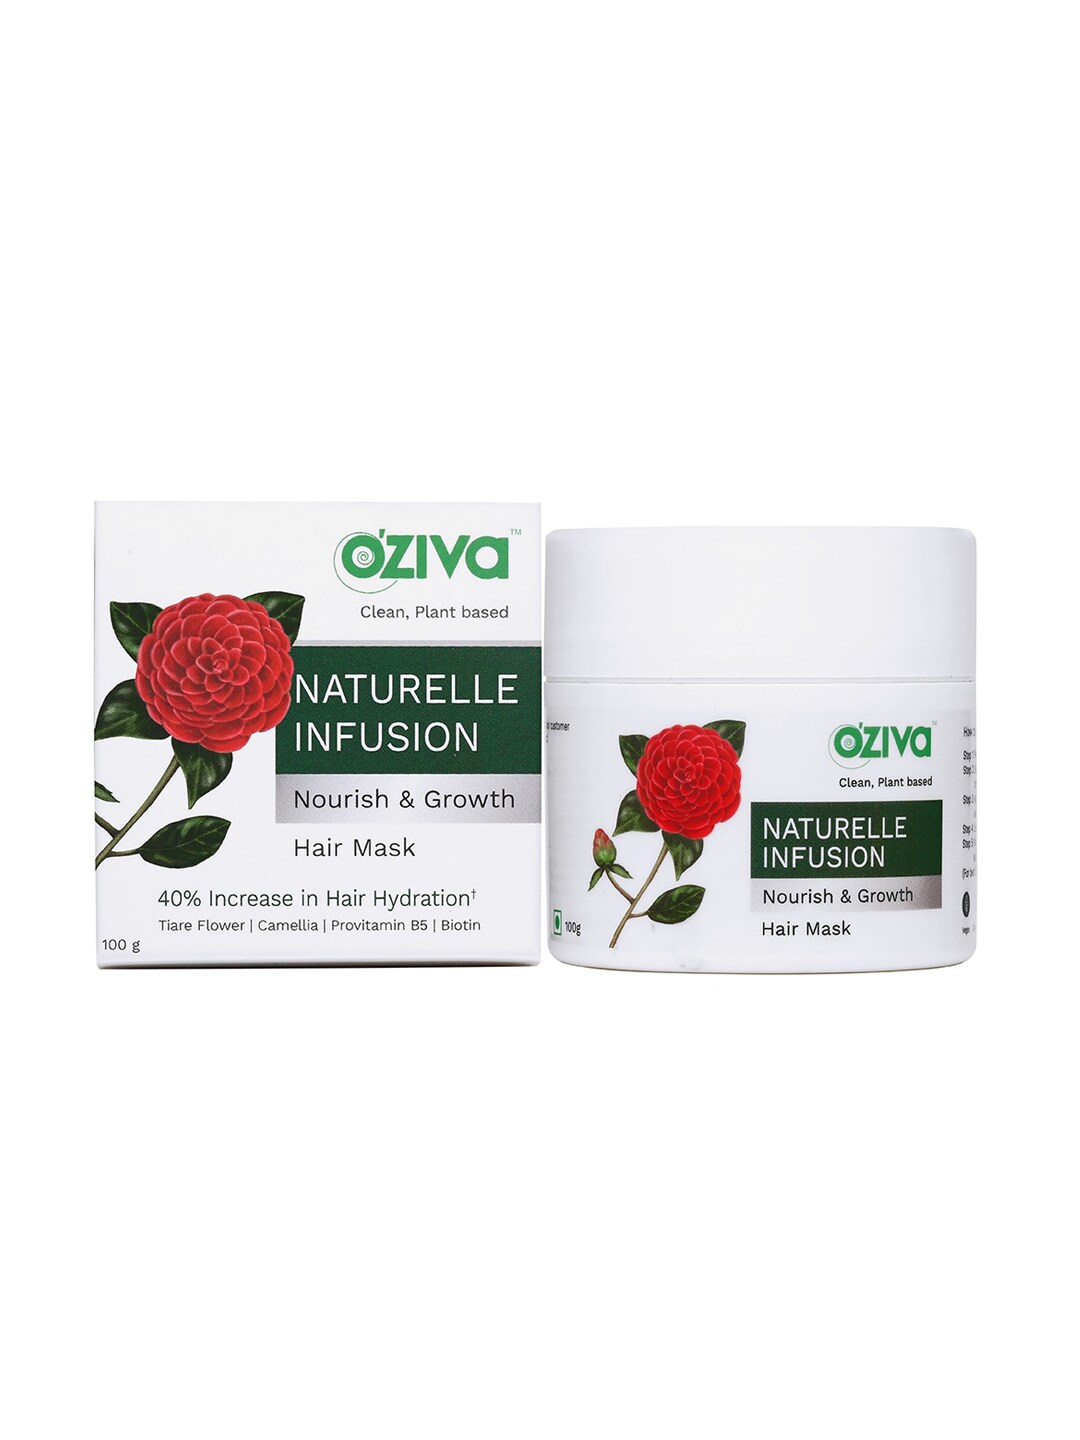 OZiva Naturelle Infusion Nourish & Growth Hair Mask with Provitamin B5 & Camellia Price in India